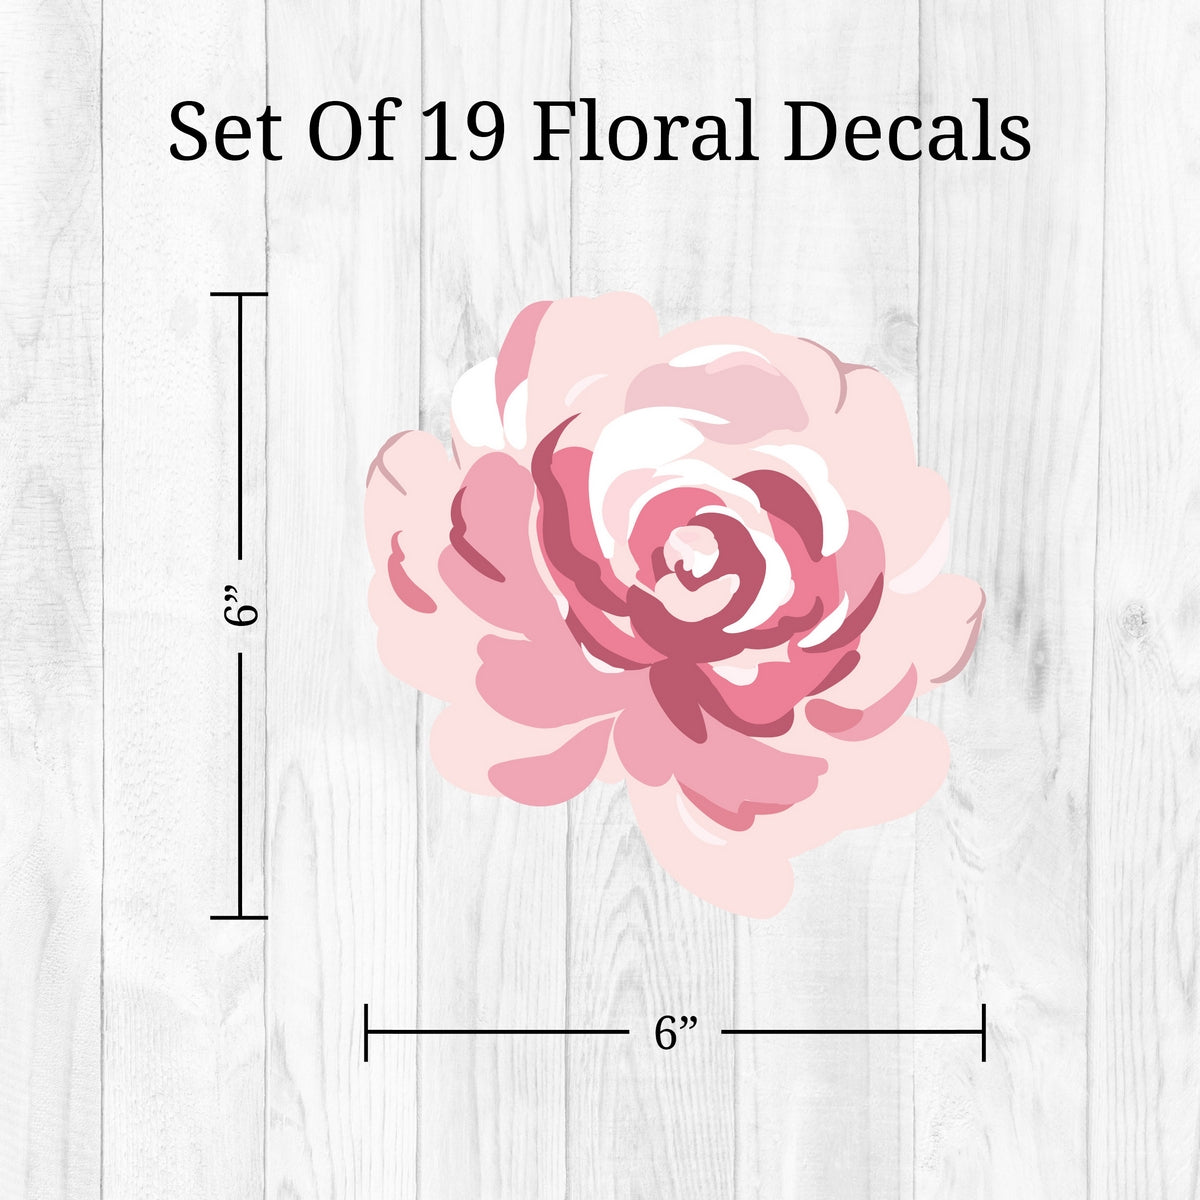 Pastel Floral Kids' Wall Decor - Decalcomania